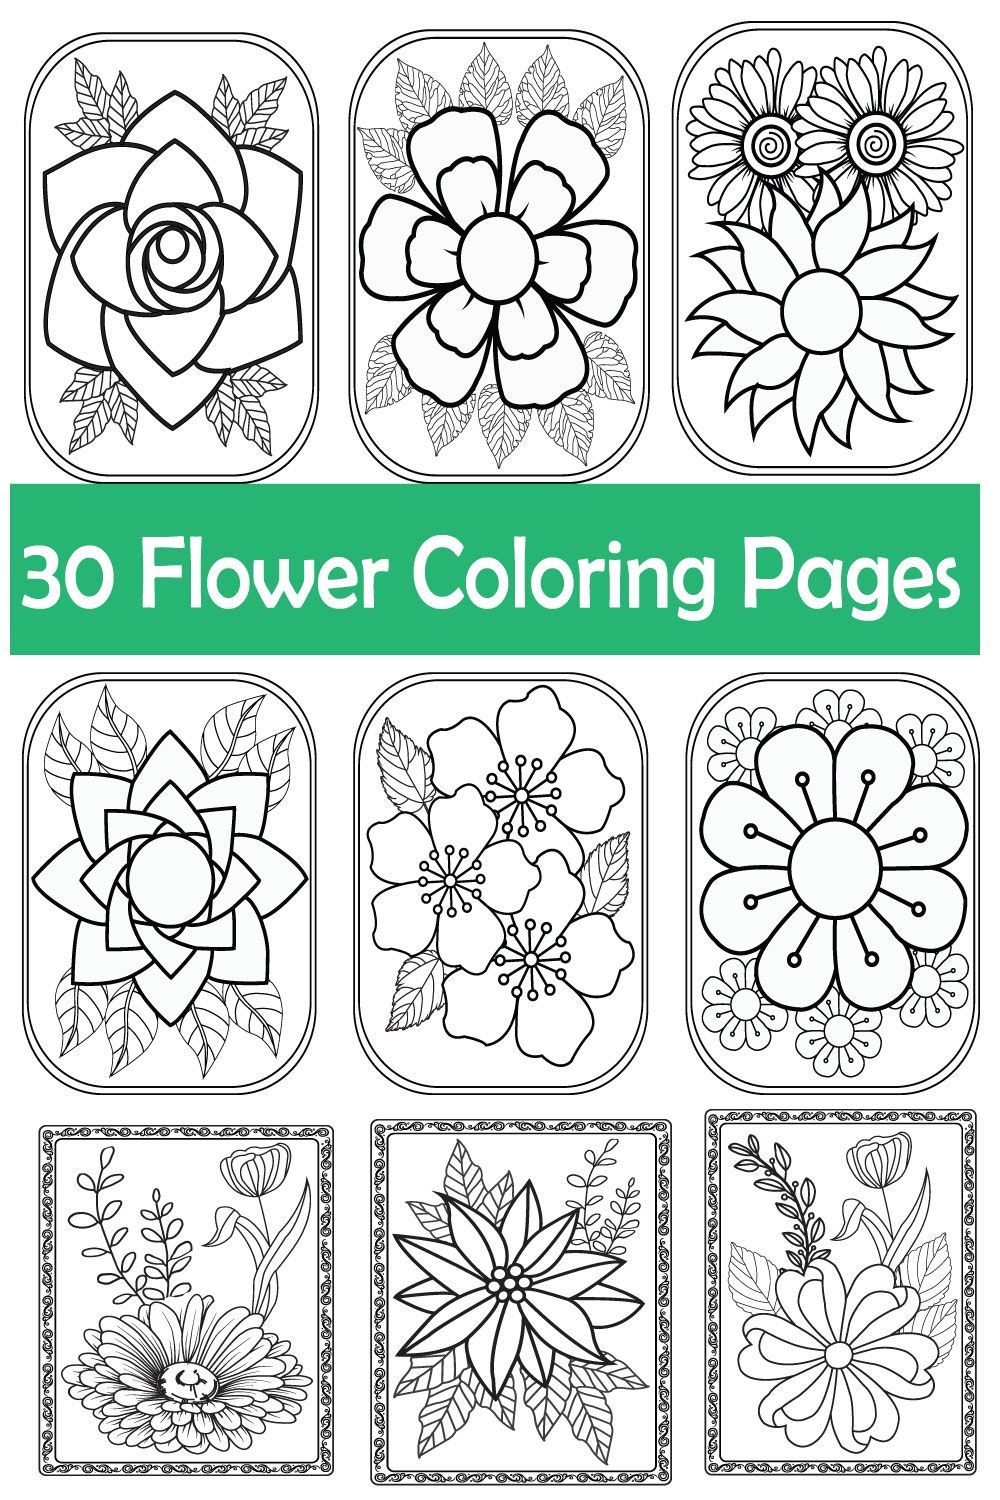 30 Flower Coloring Pages pinterest preview image.